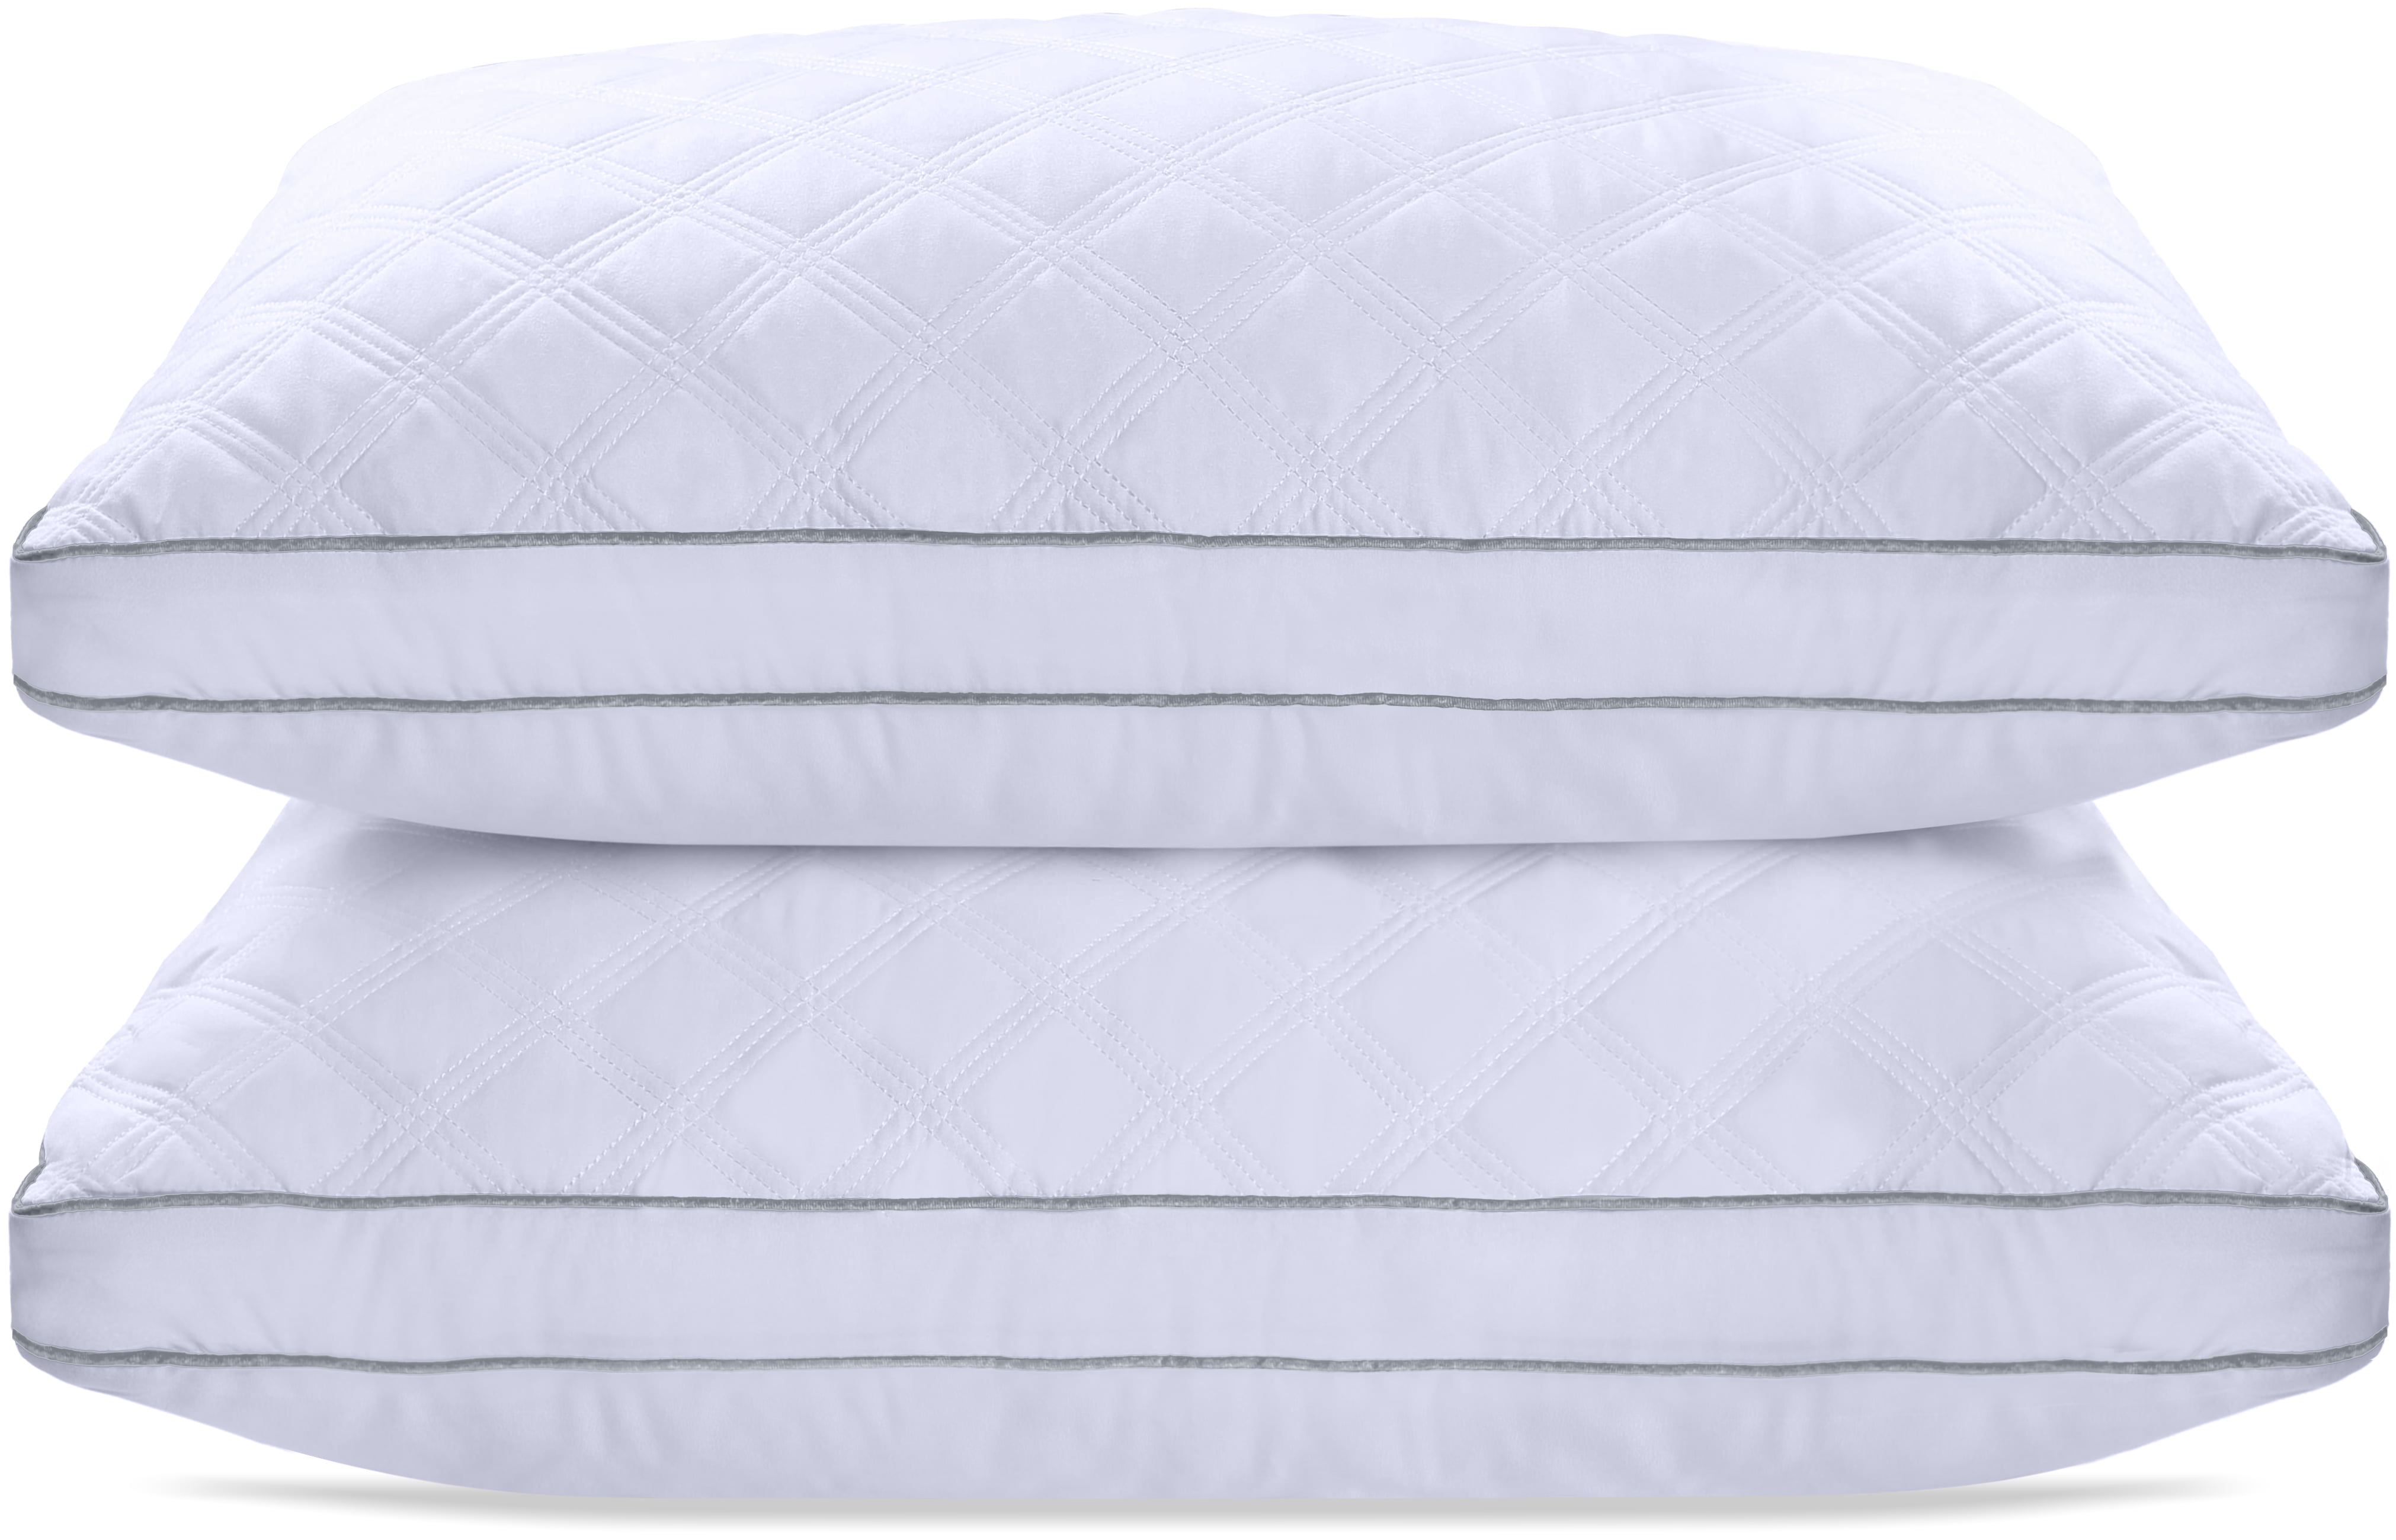 Basics Down-Alternative Gusseted Pillows with Cotton Shell 2-Pack GW2018031622-1 Queen